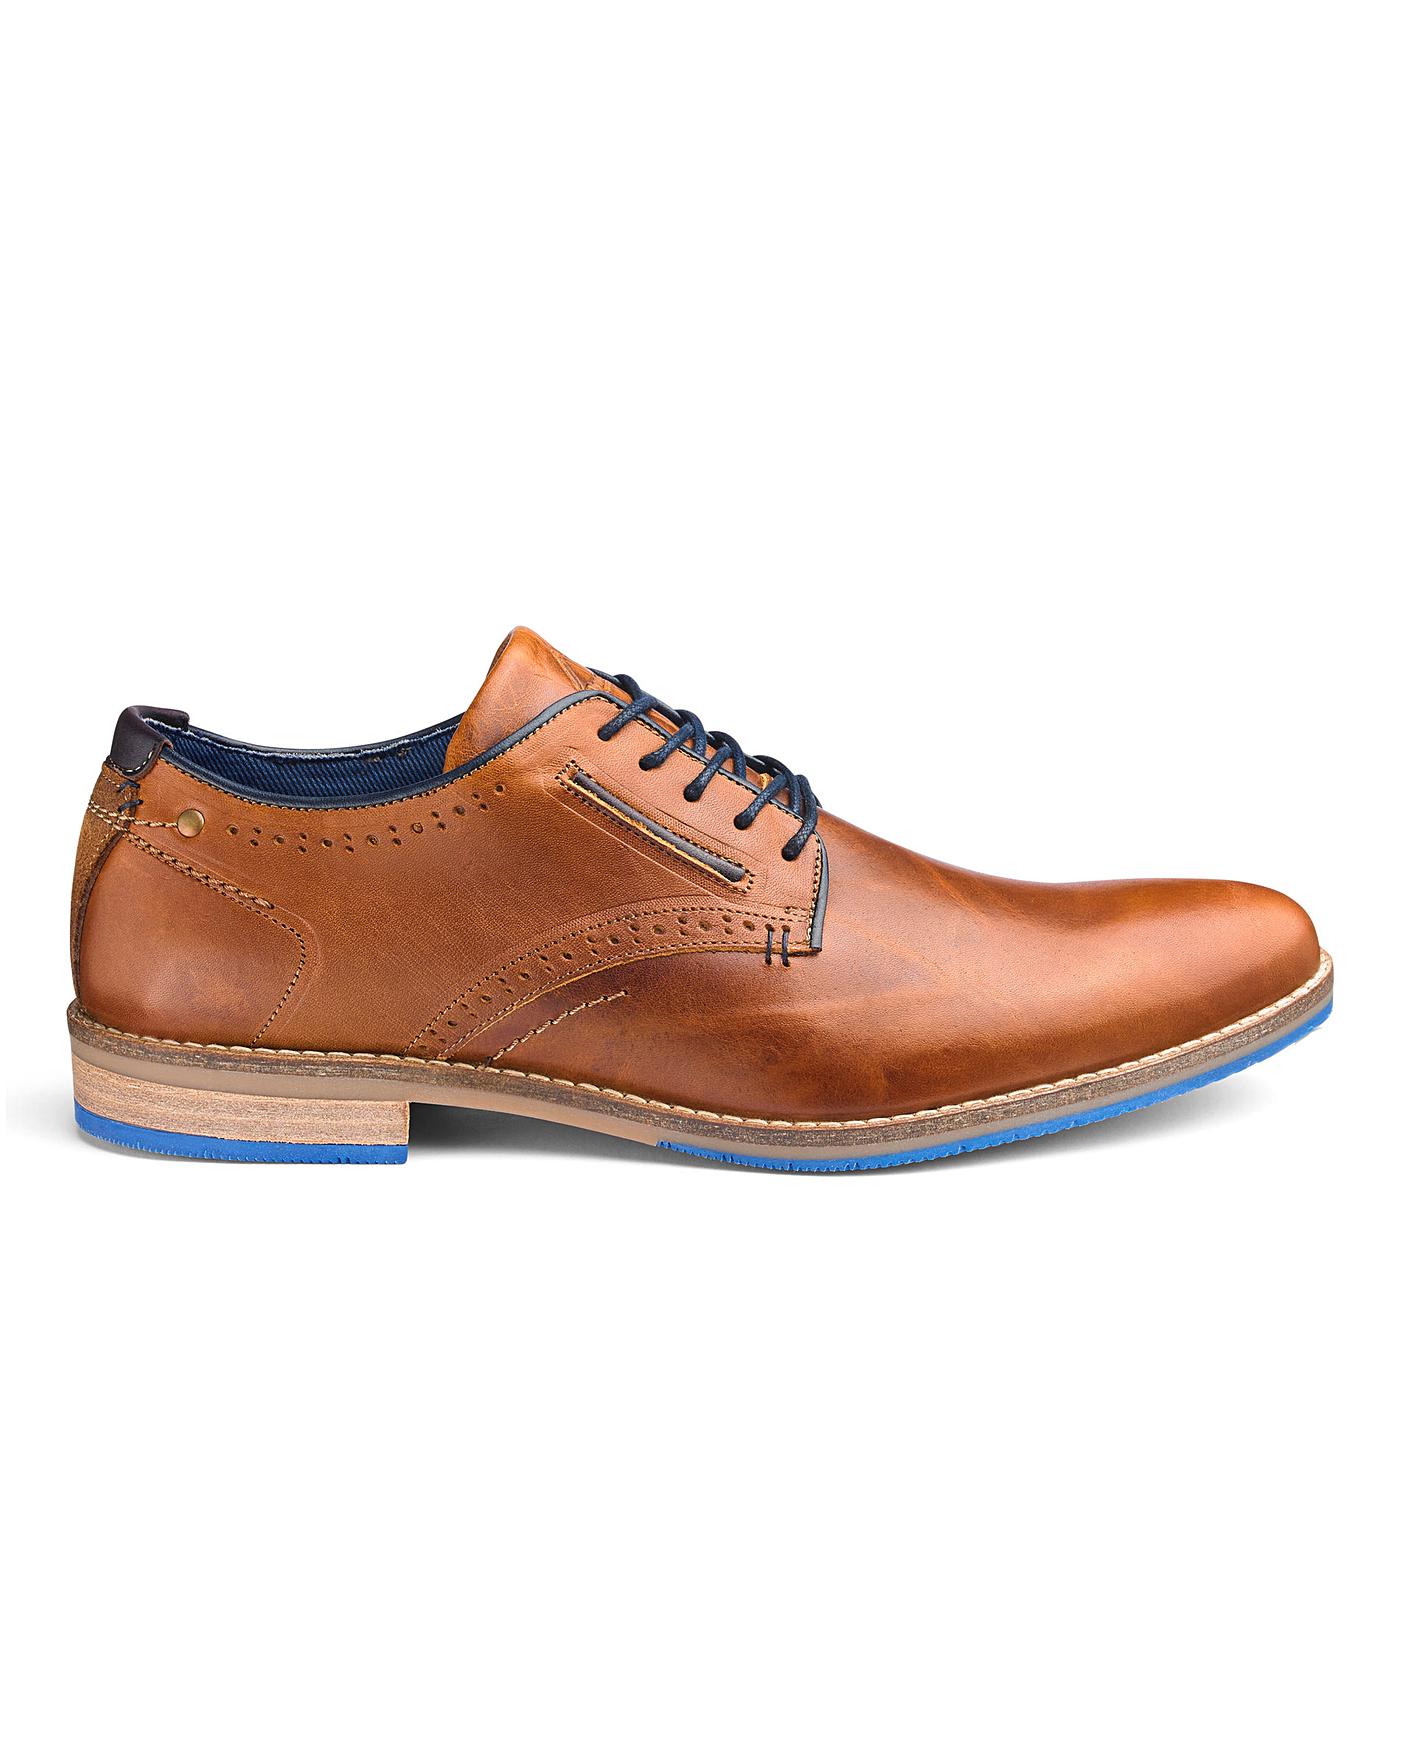 Dune Brewer Casual Shoes | Ambrose Wilson